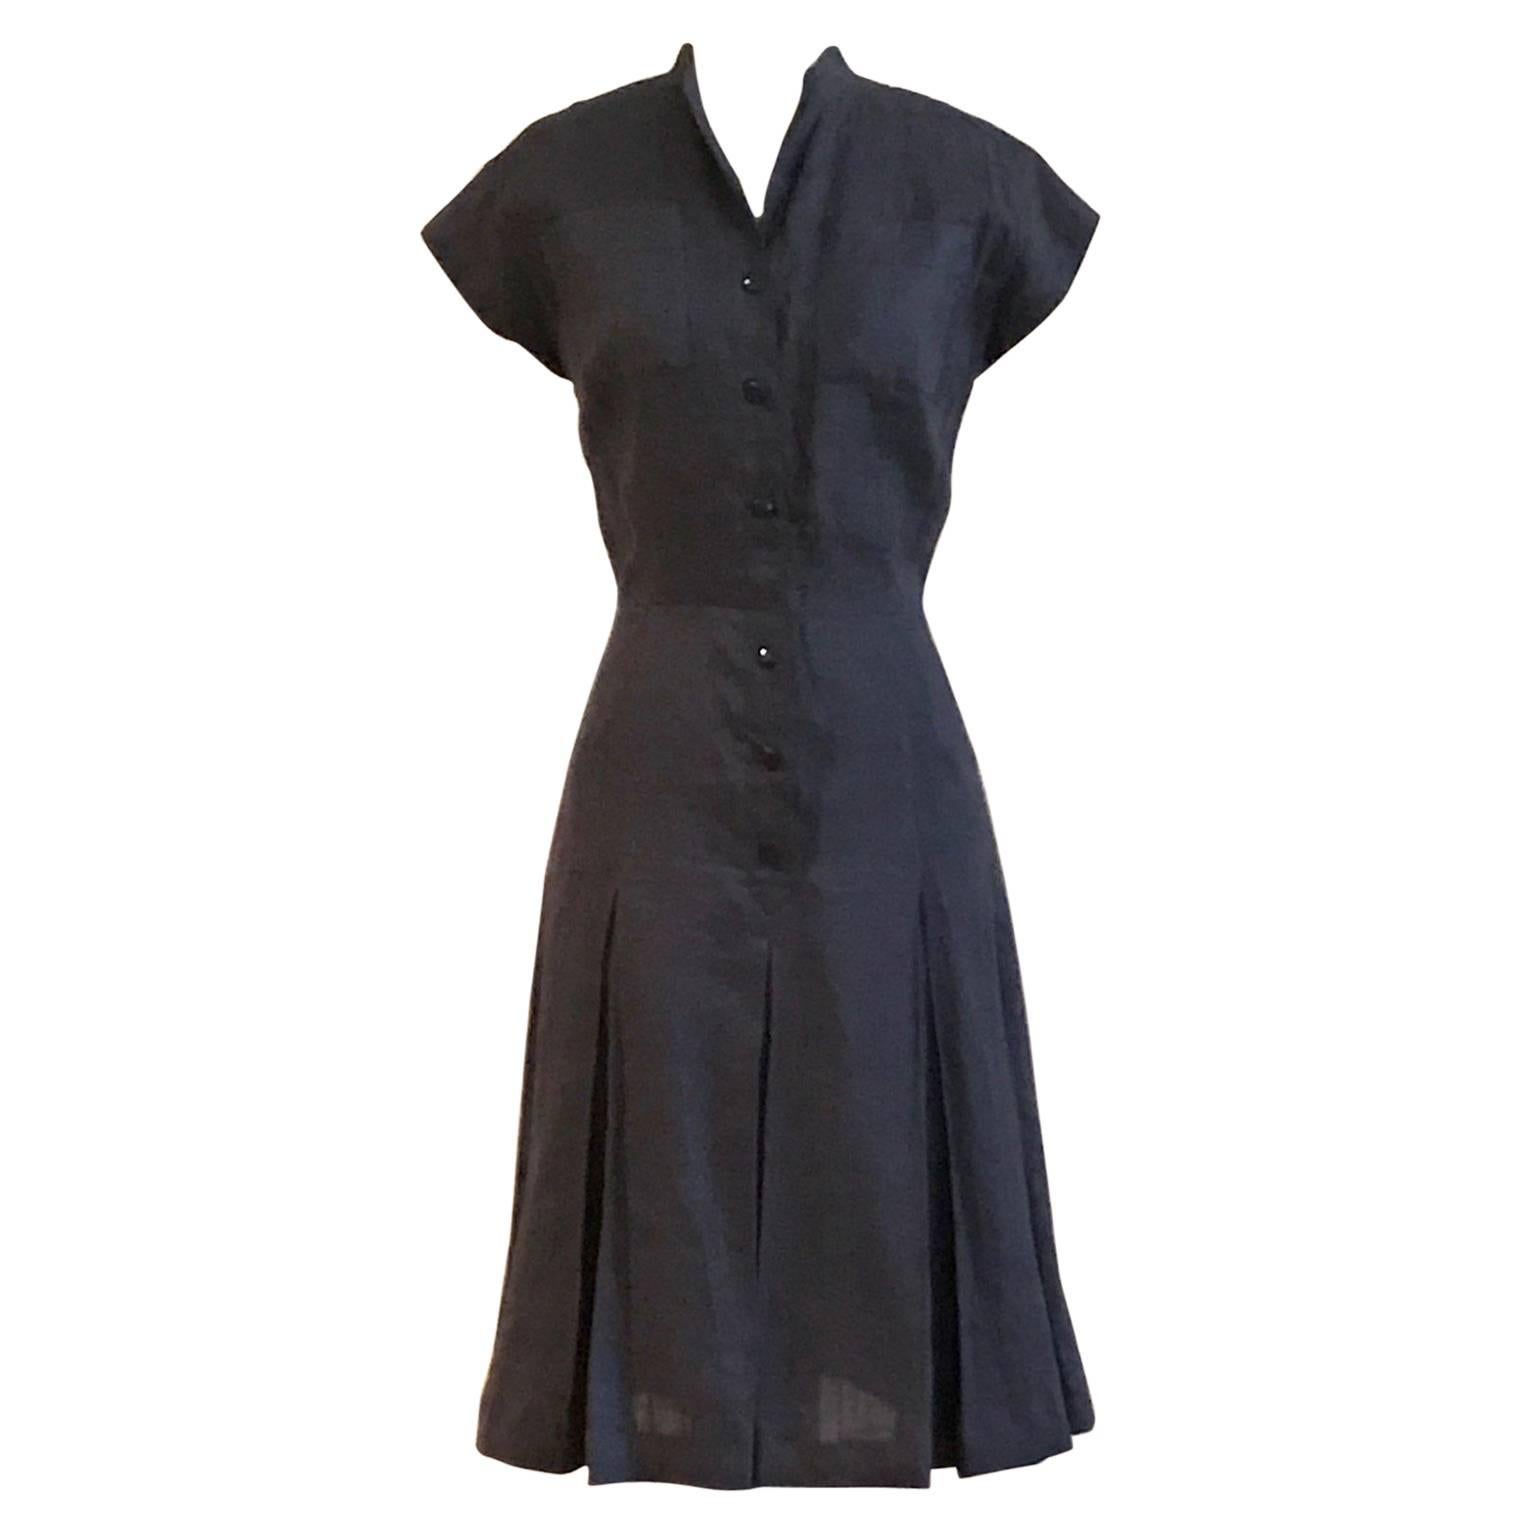 Sorelle Fontana Early Vintage Navy Blue Button Front Shirt Dress with Pockets